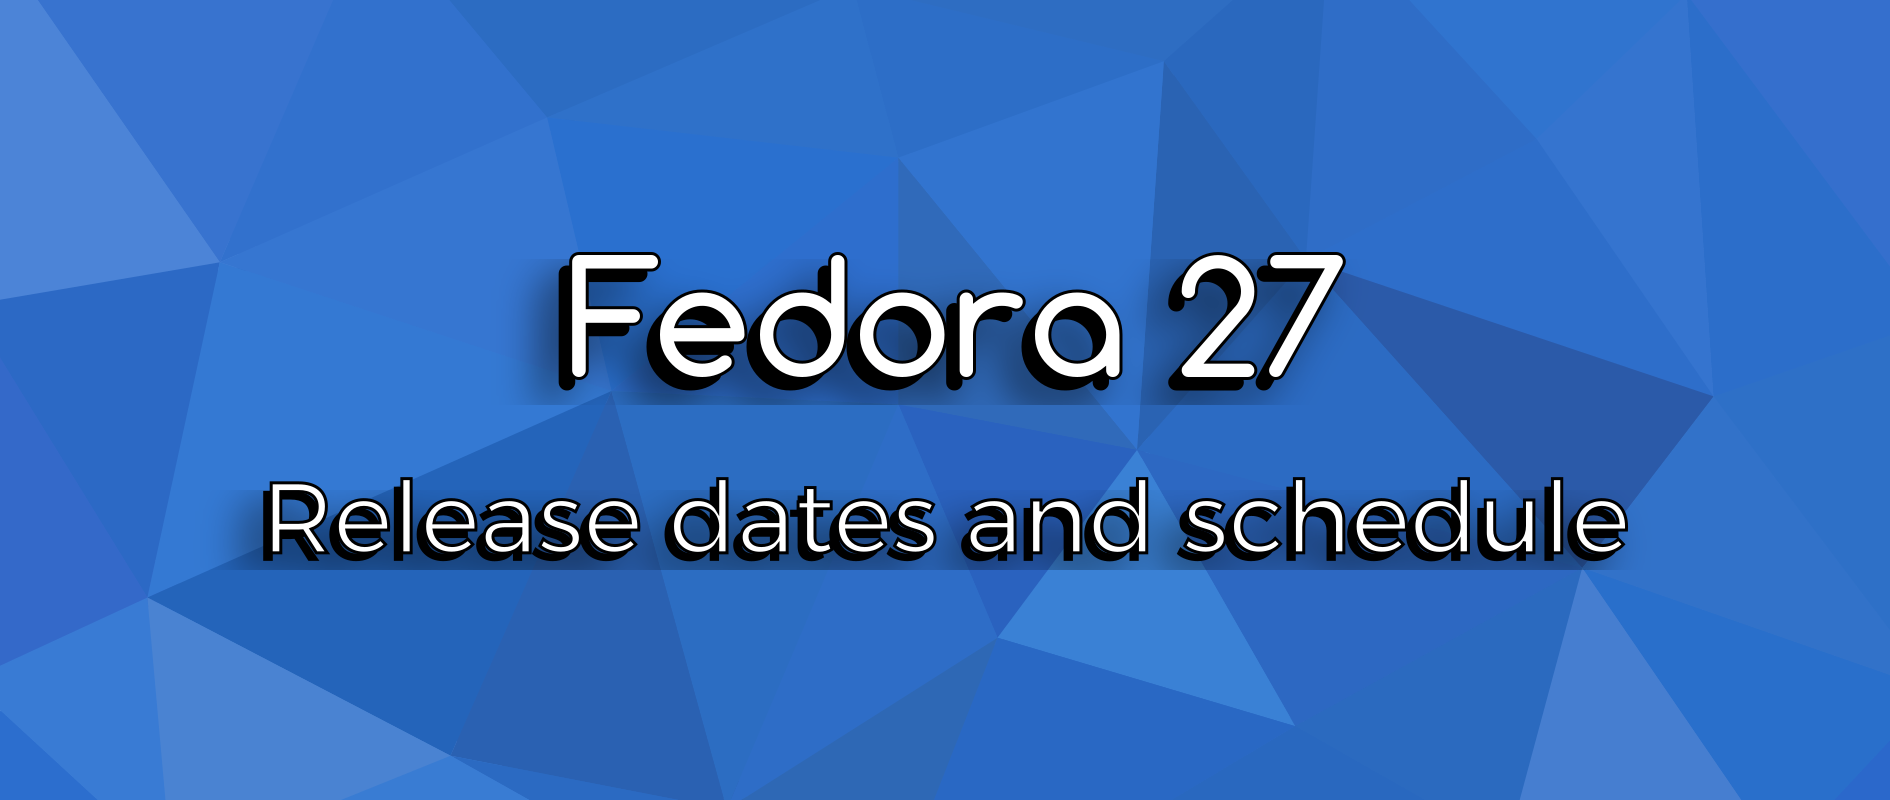 Fedora 27 release dates and schedule